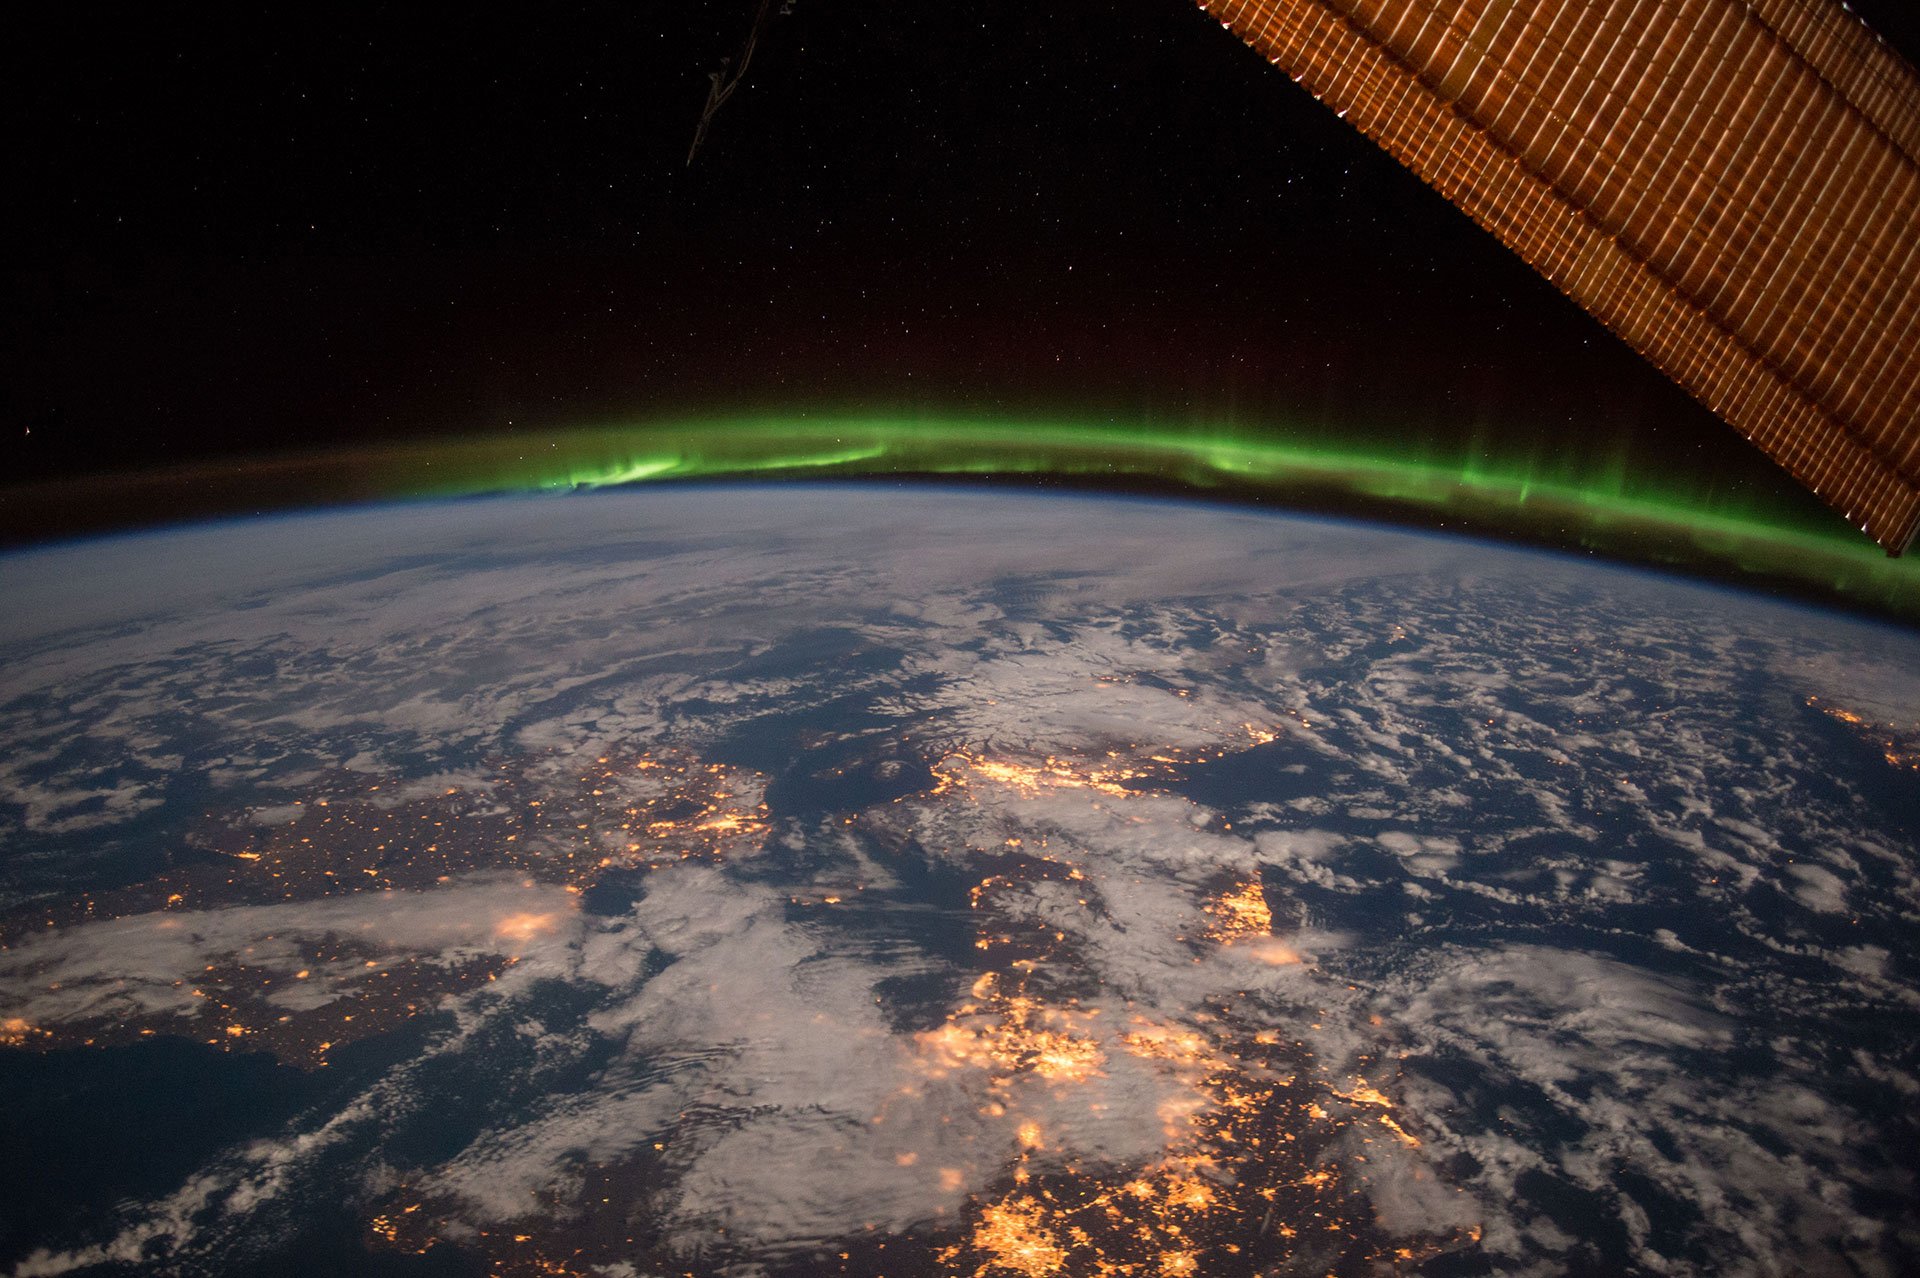 Earth observation of Ireland, United Kingdom and Scandinavia on a moonlit night under an amazing and ever-changing aurora, on Feb. 6, 2015. Image captured by Terry Virts, a flight engineer on the International Space Station with Expedition 42.